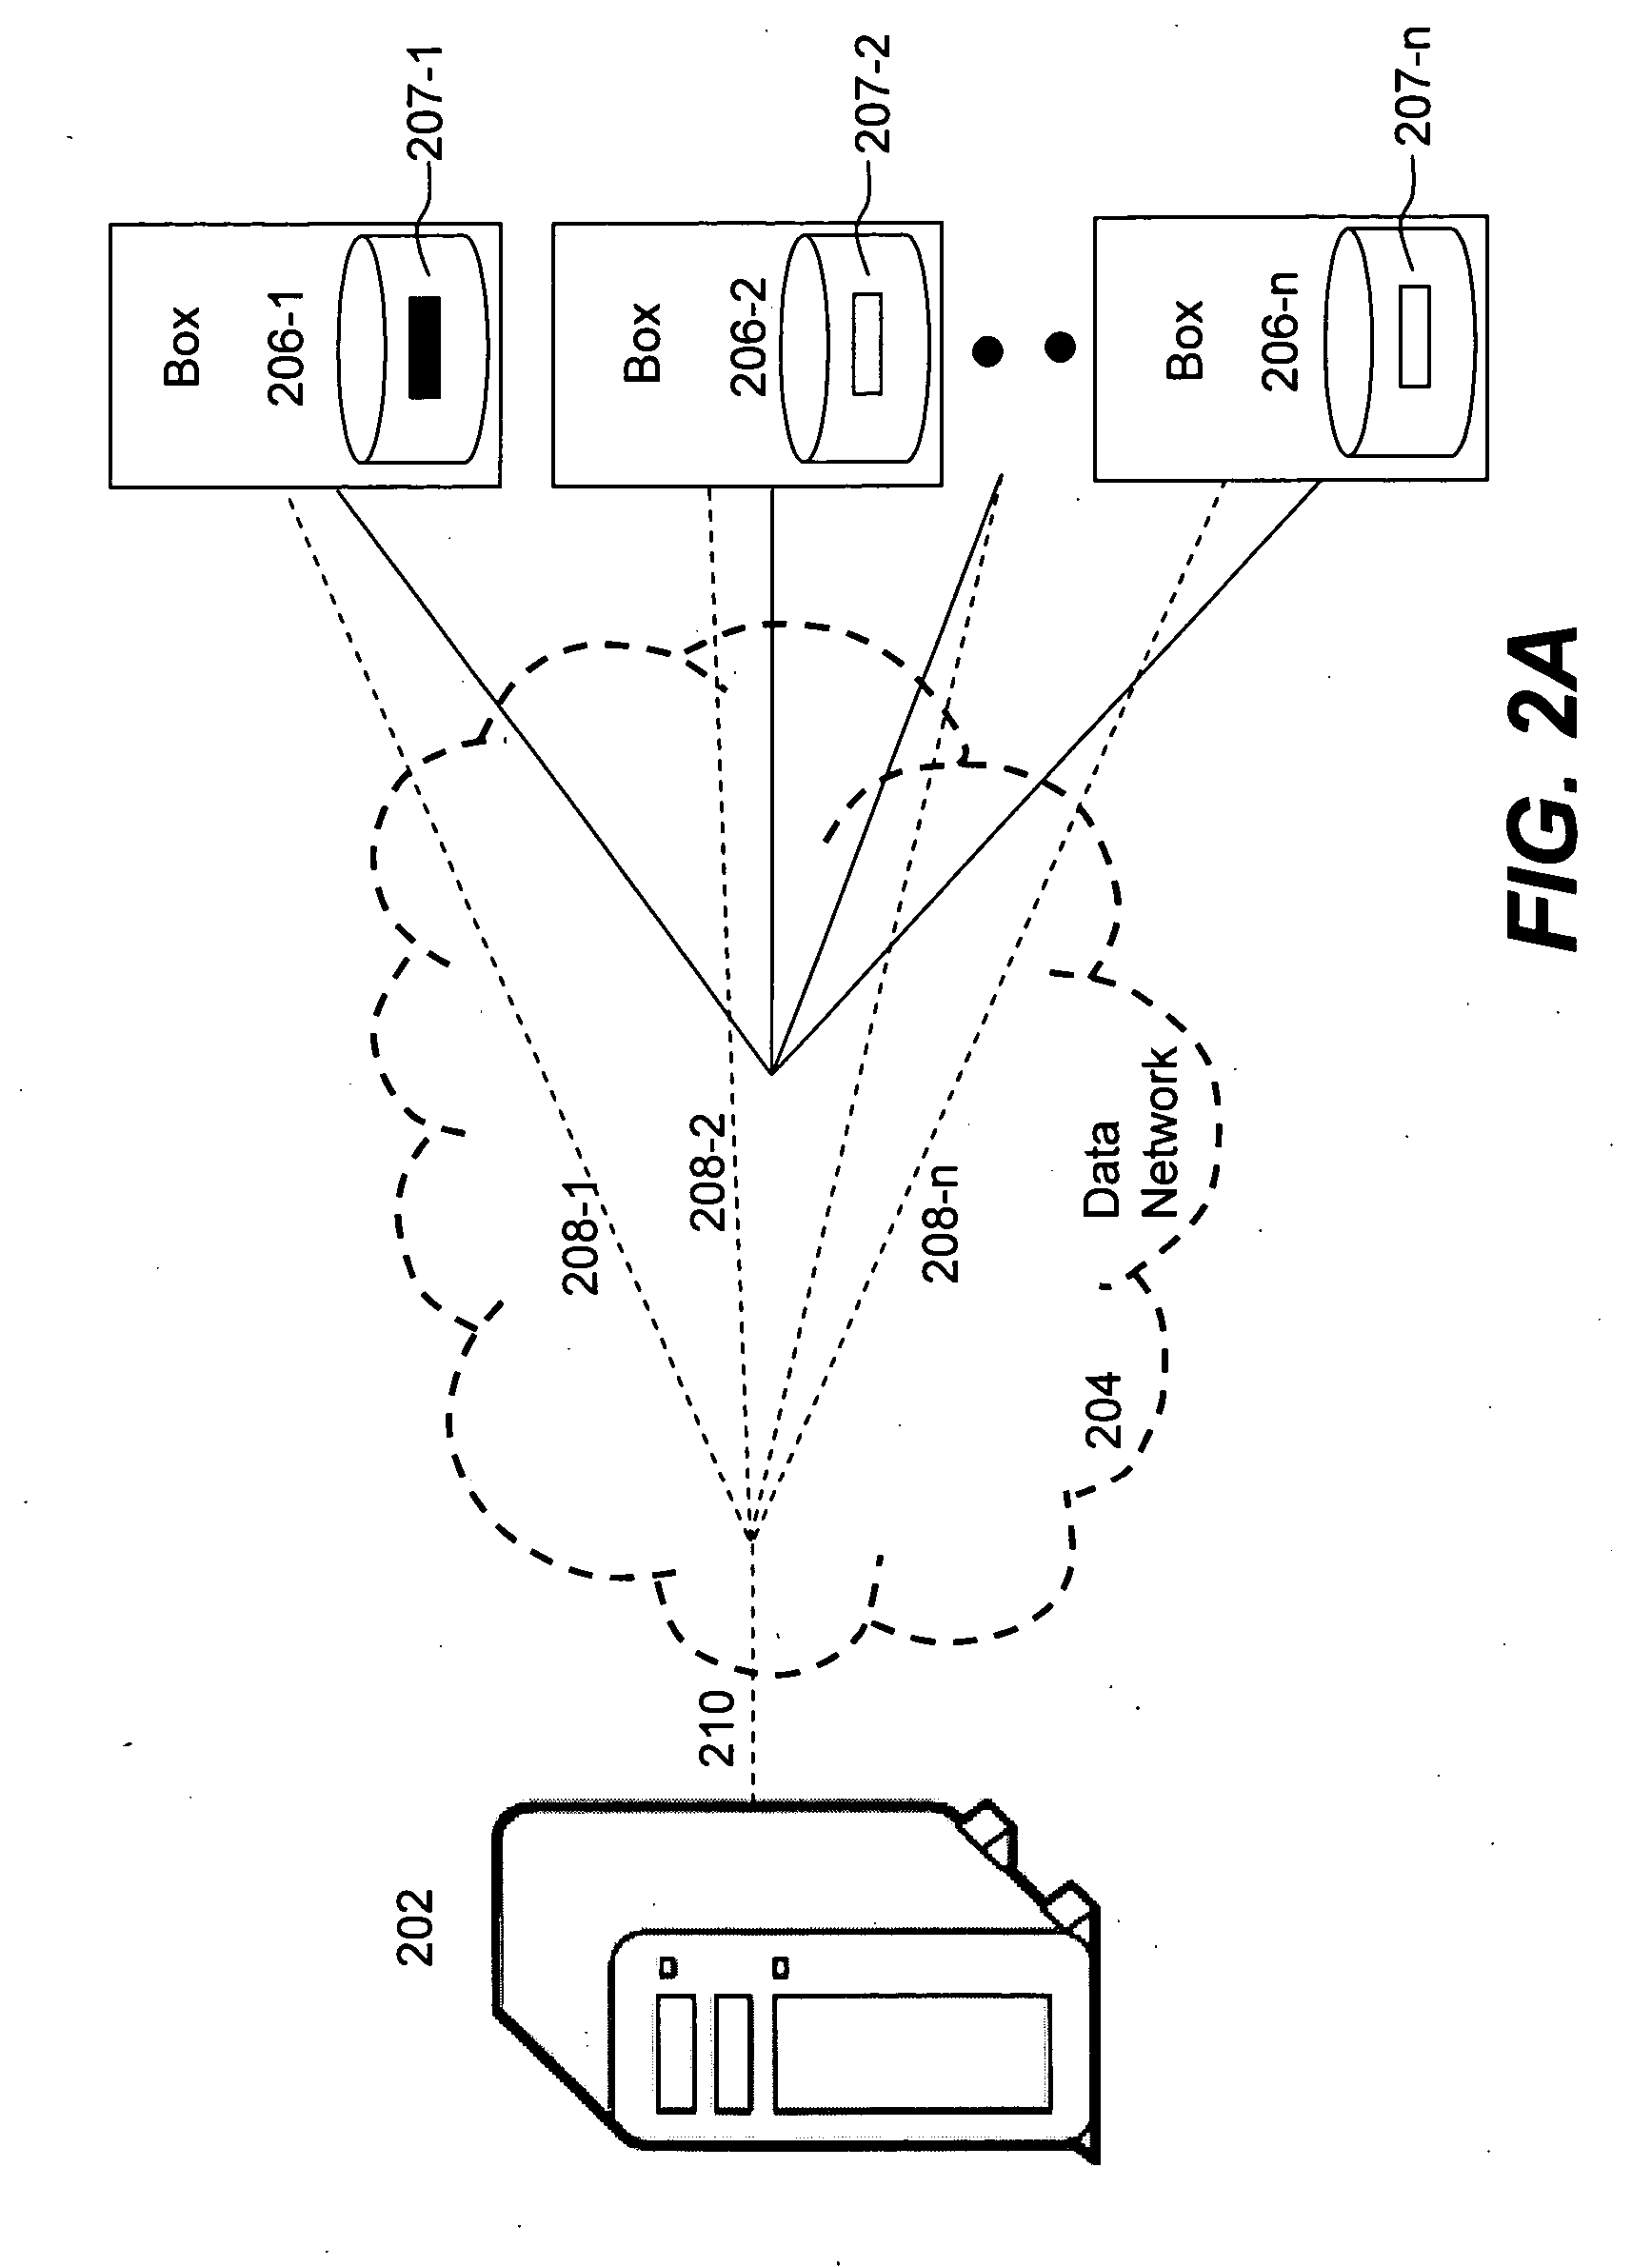 Method and system for providing instantaneous media-on-demand services